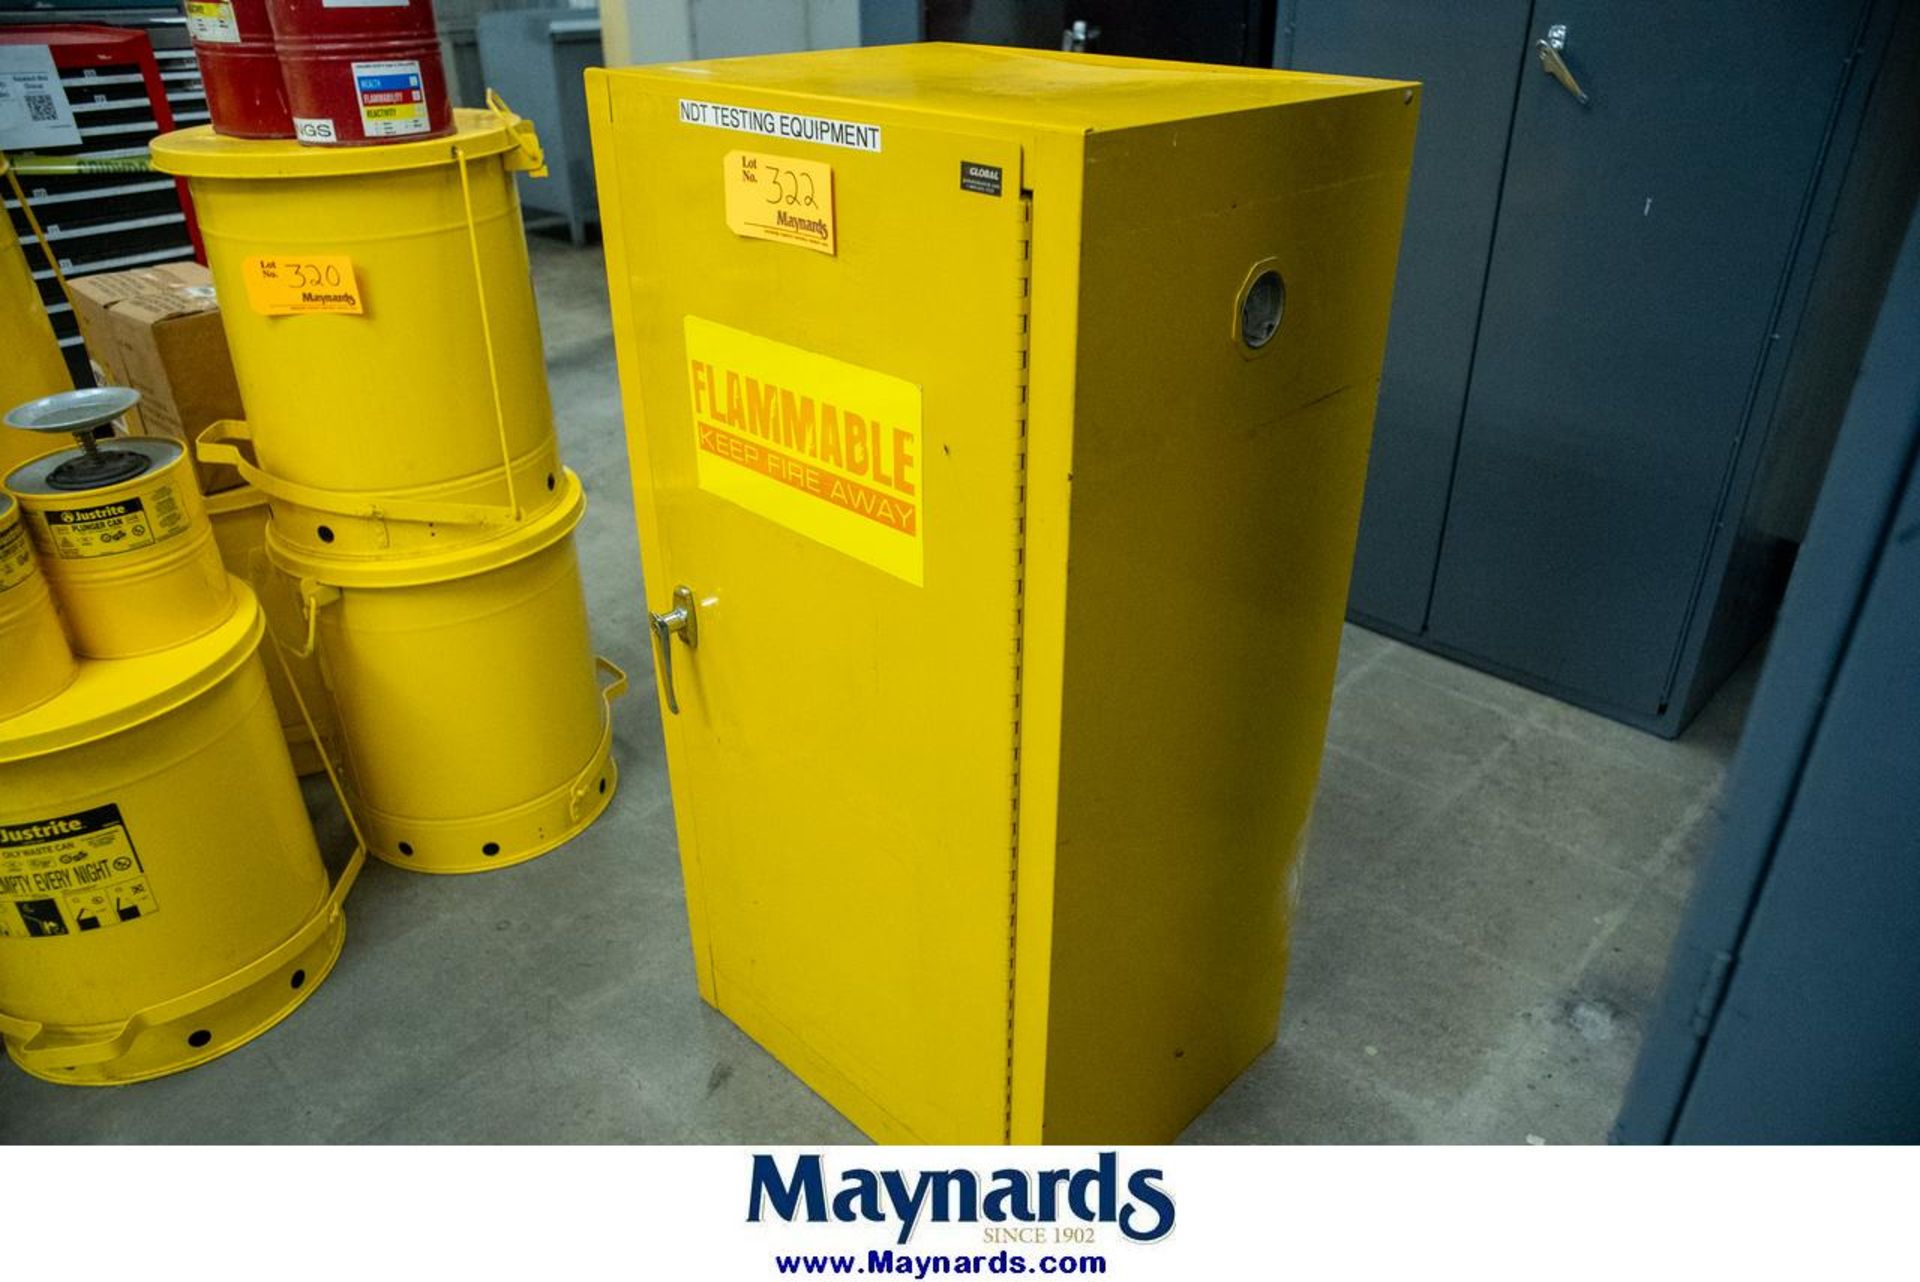 Global Industrial Safety Storage Cabinet (23" W x 18" D x 44-3/8" H) - Image 2 of 4